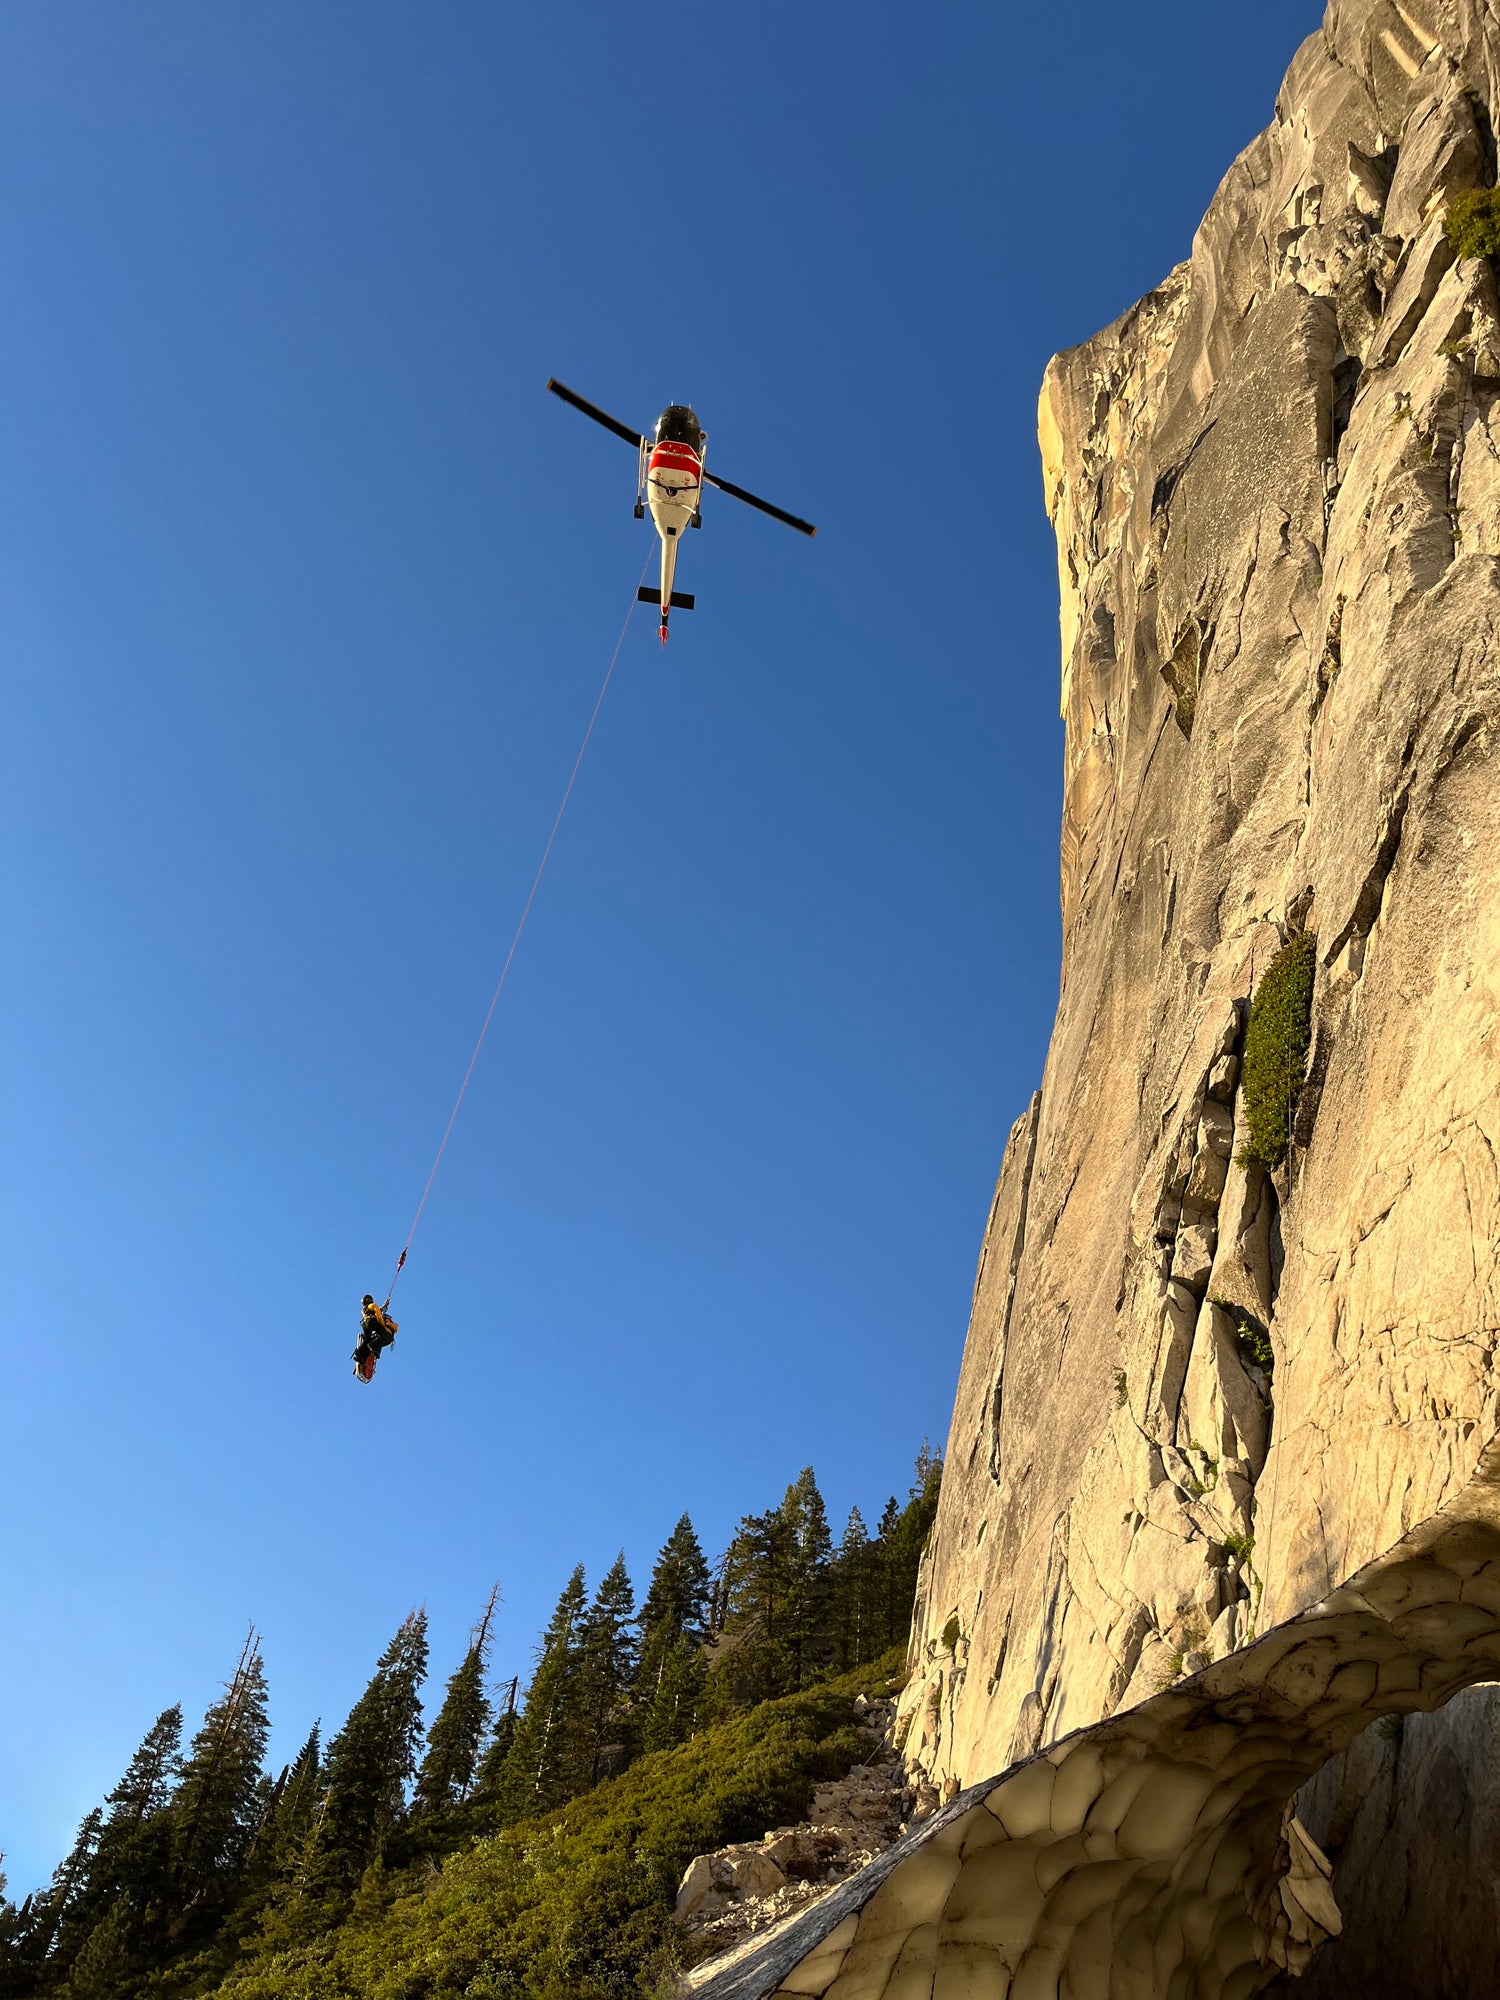 A helicopter next to a large cliff picks up an injured person